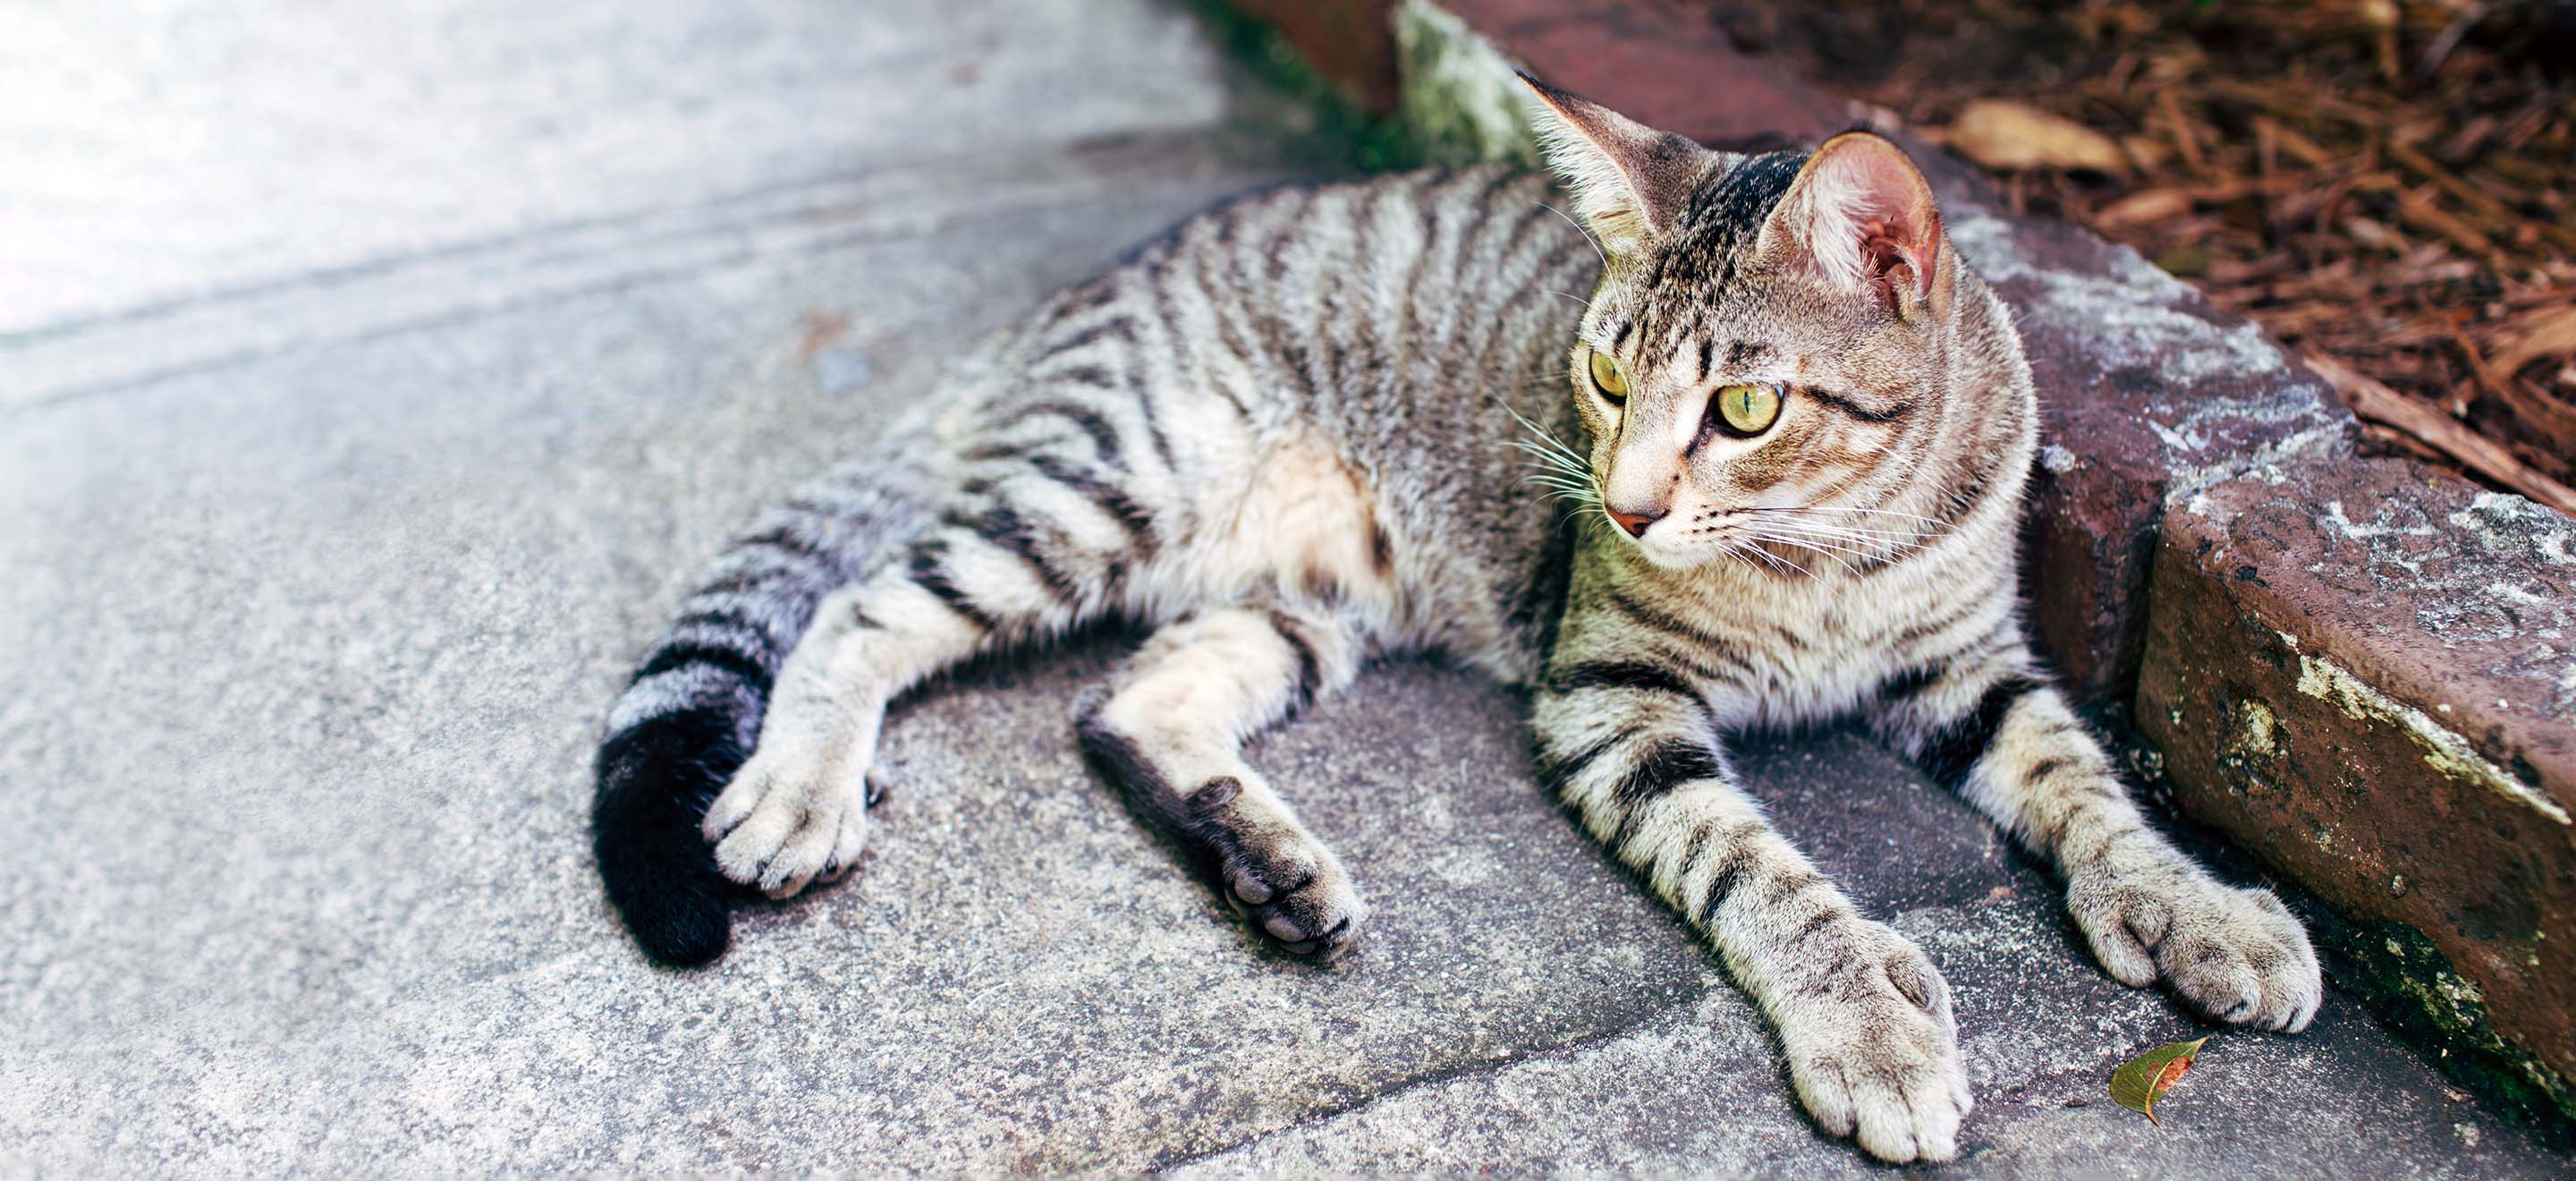 A gray tabby cat with an extra toe on all paws lays by the curb image